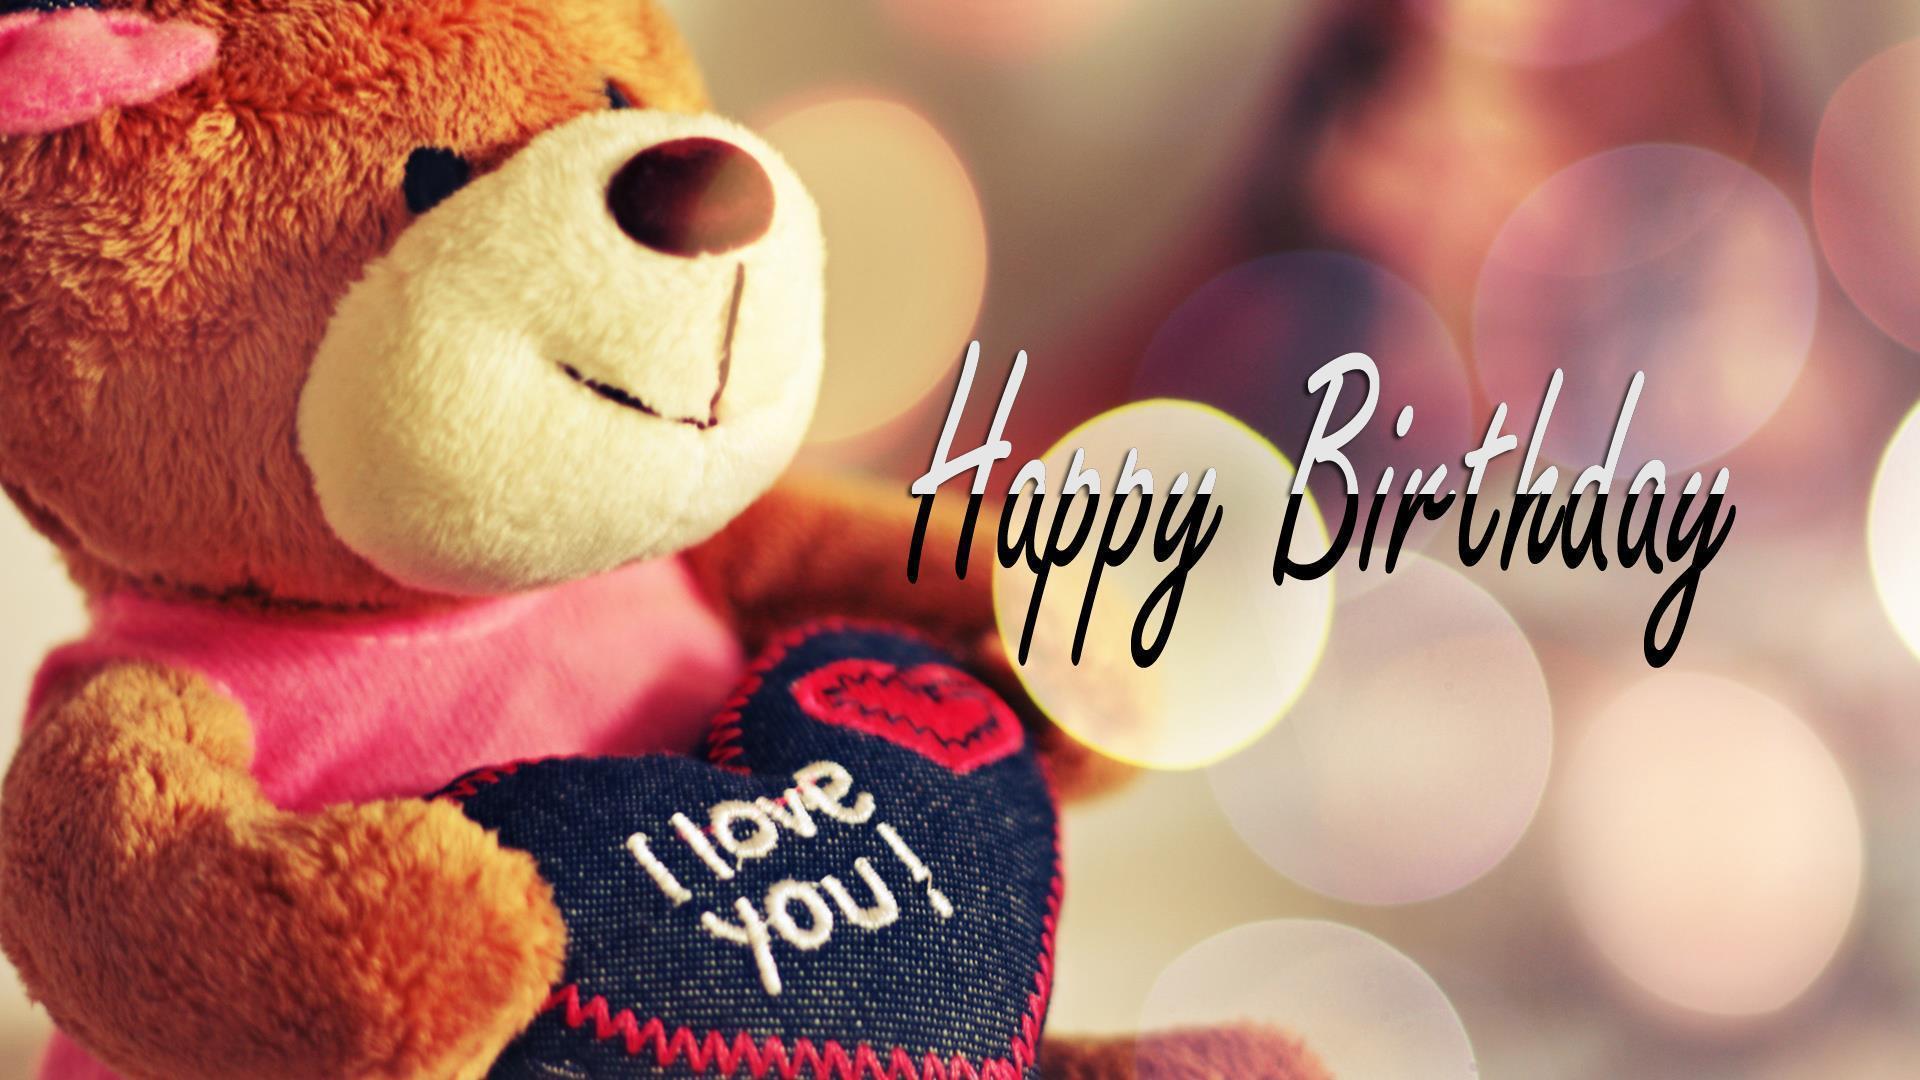 Happy Birthday To my Love HD Wallpaper, Messages & Quotes